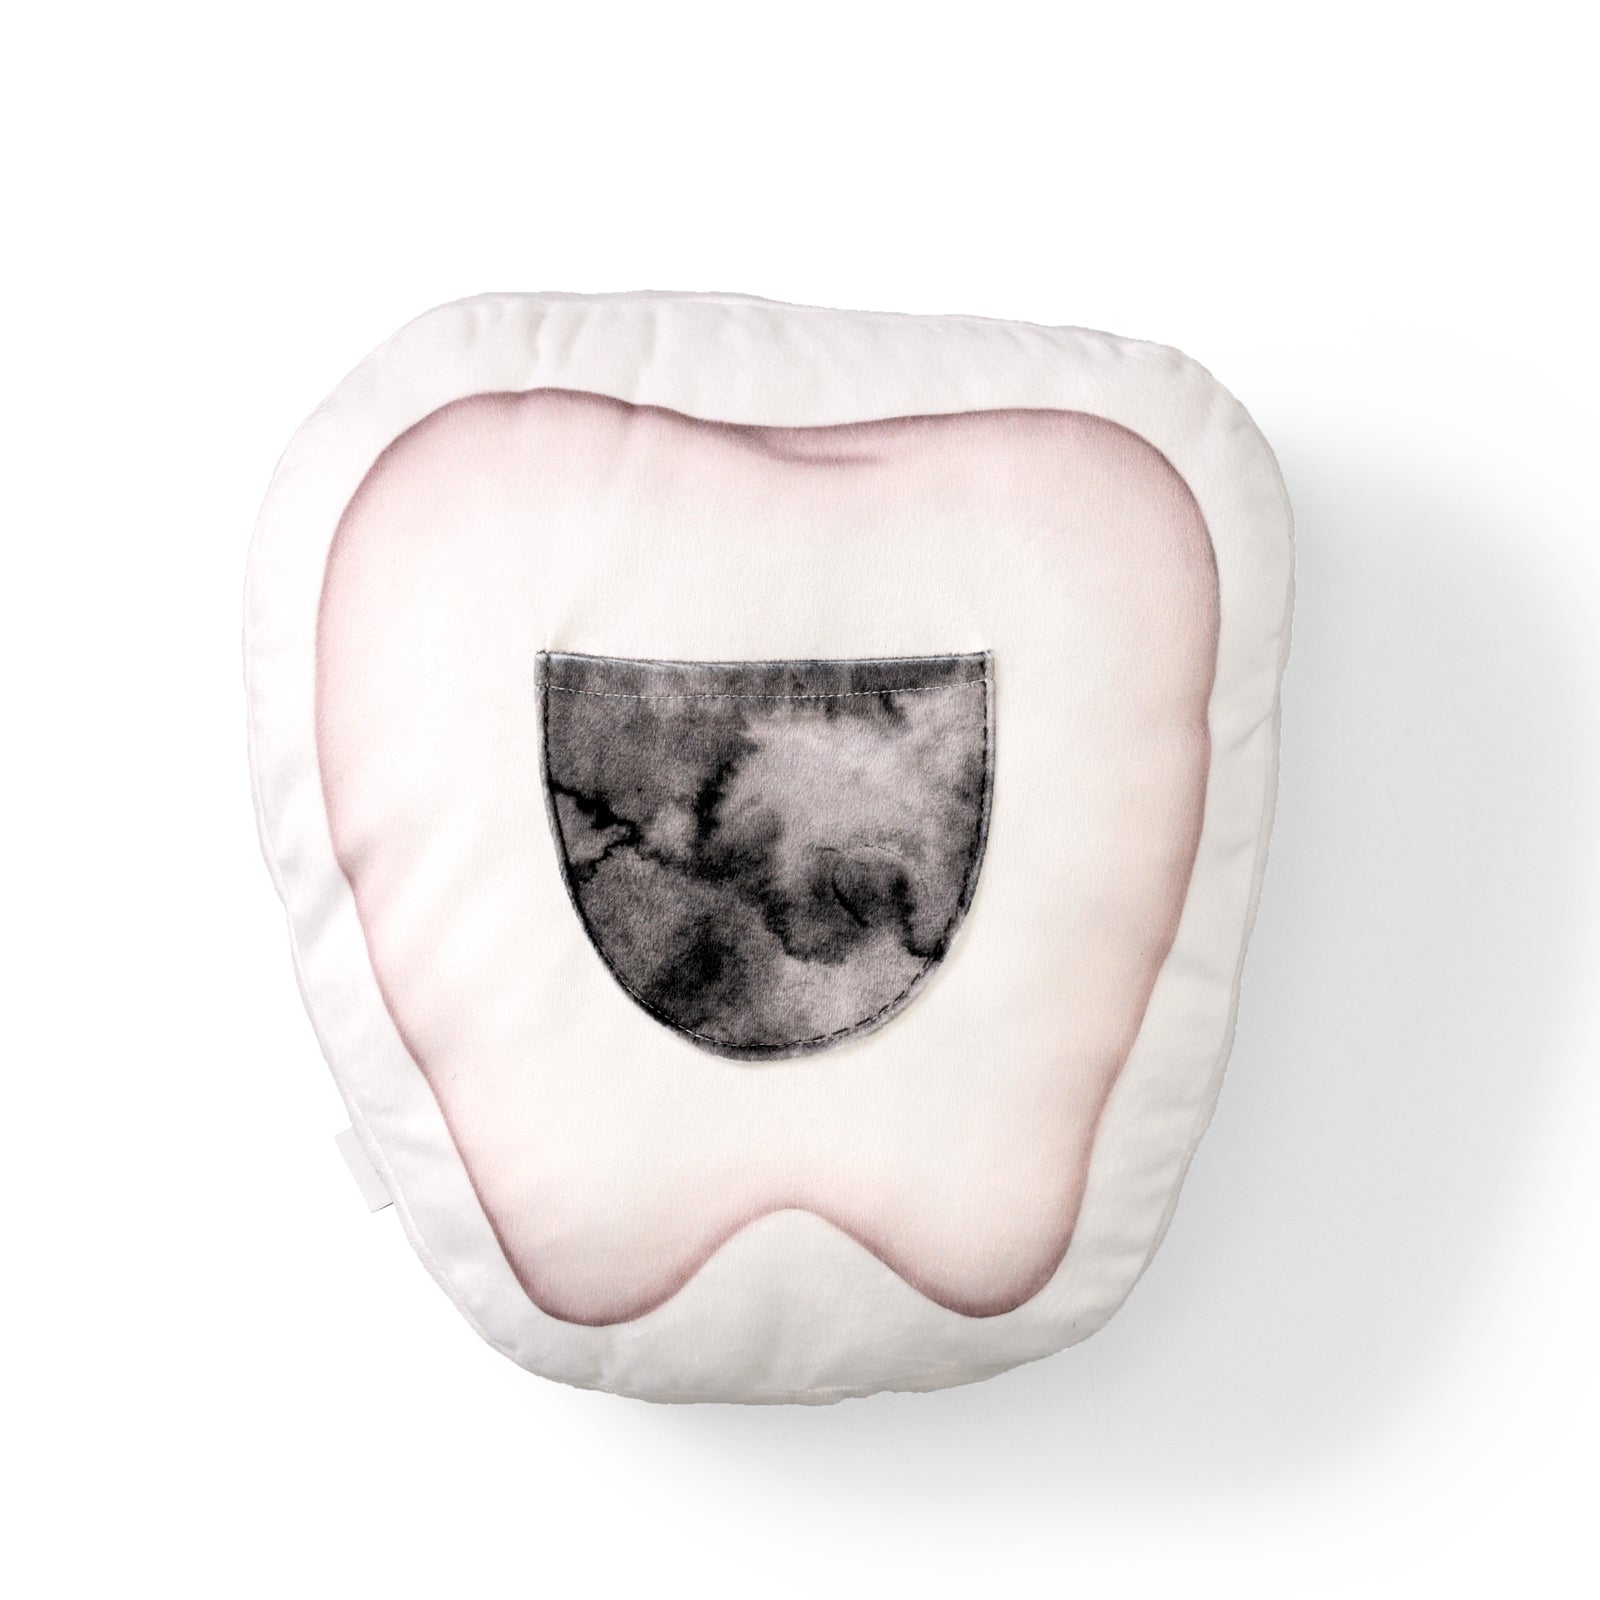 Tooth Fairy Pillow by Little Navy